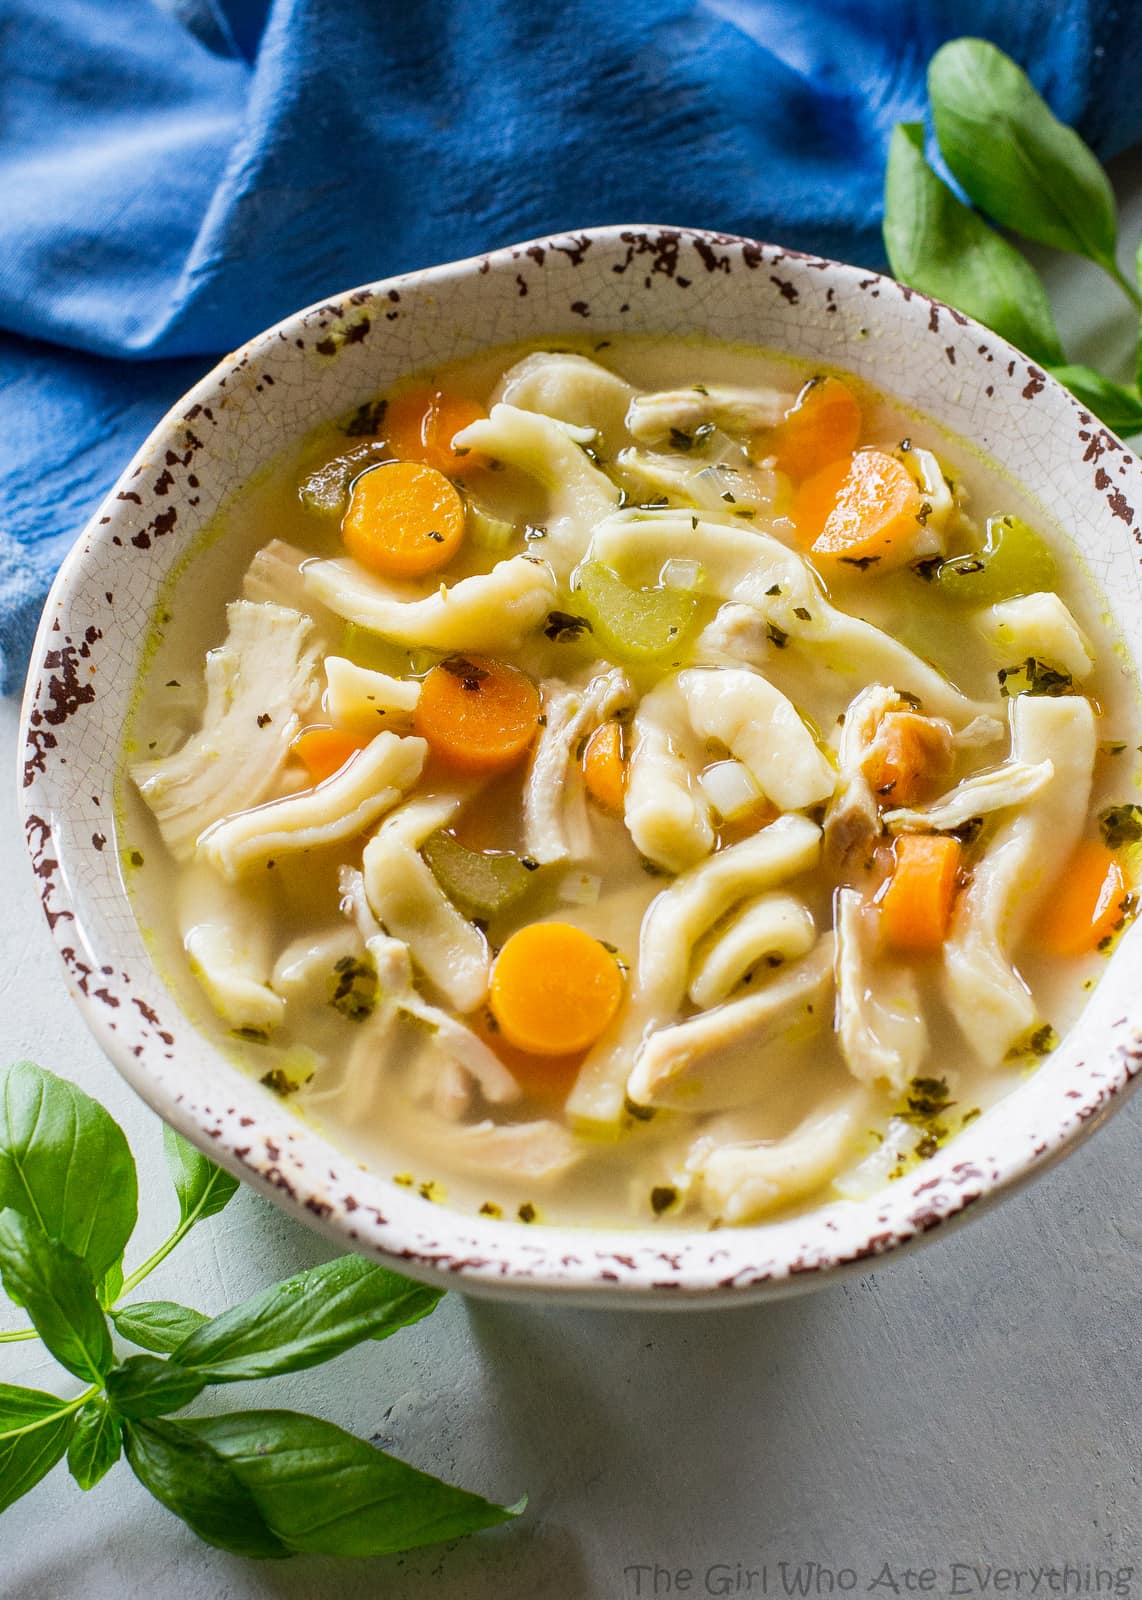 Chicken Noodle Soup - tried and true comfort food. A recipe for homemade noodles too but you can use store bought as well. the-girl-who-ate-everything.com